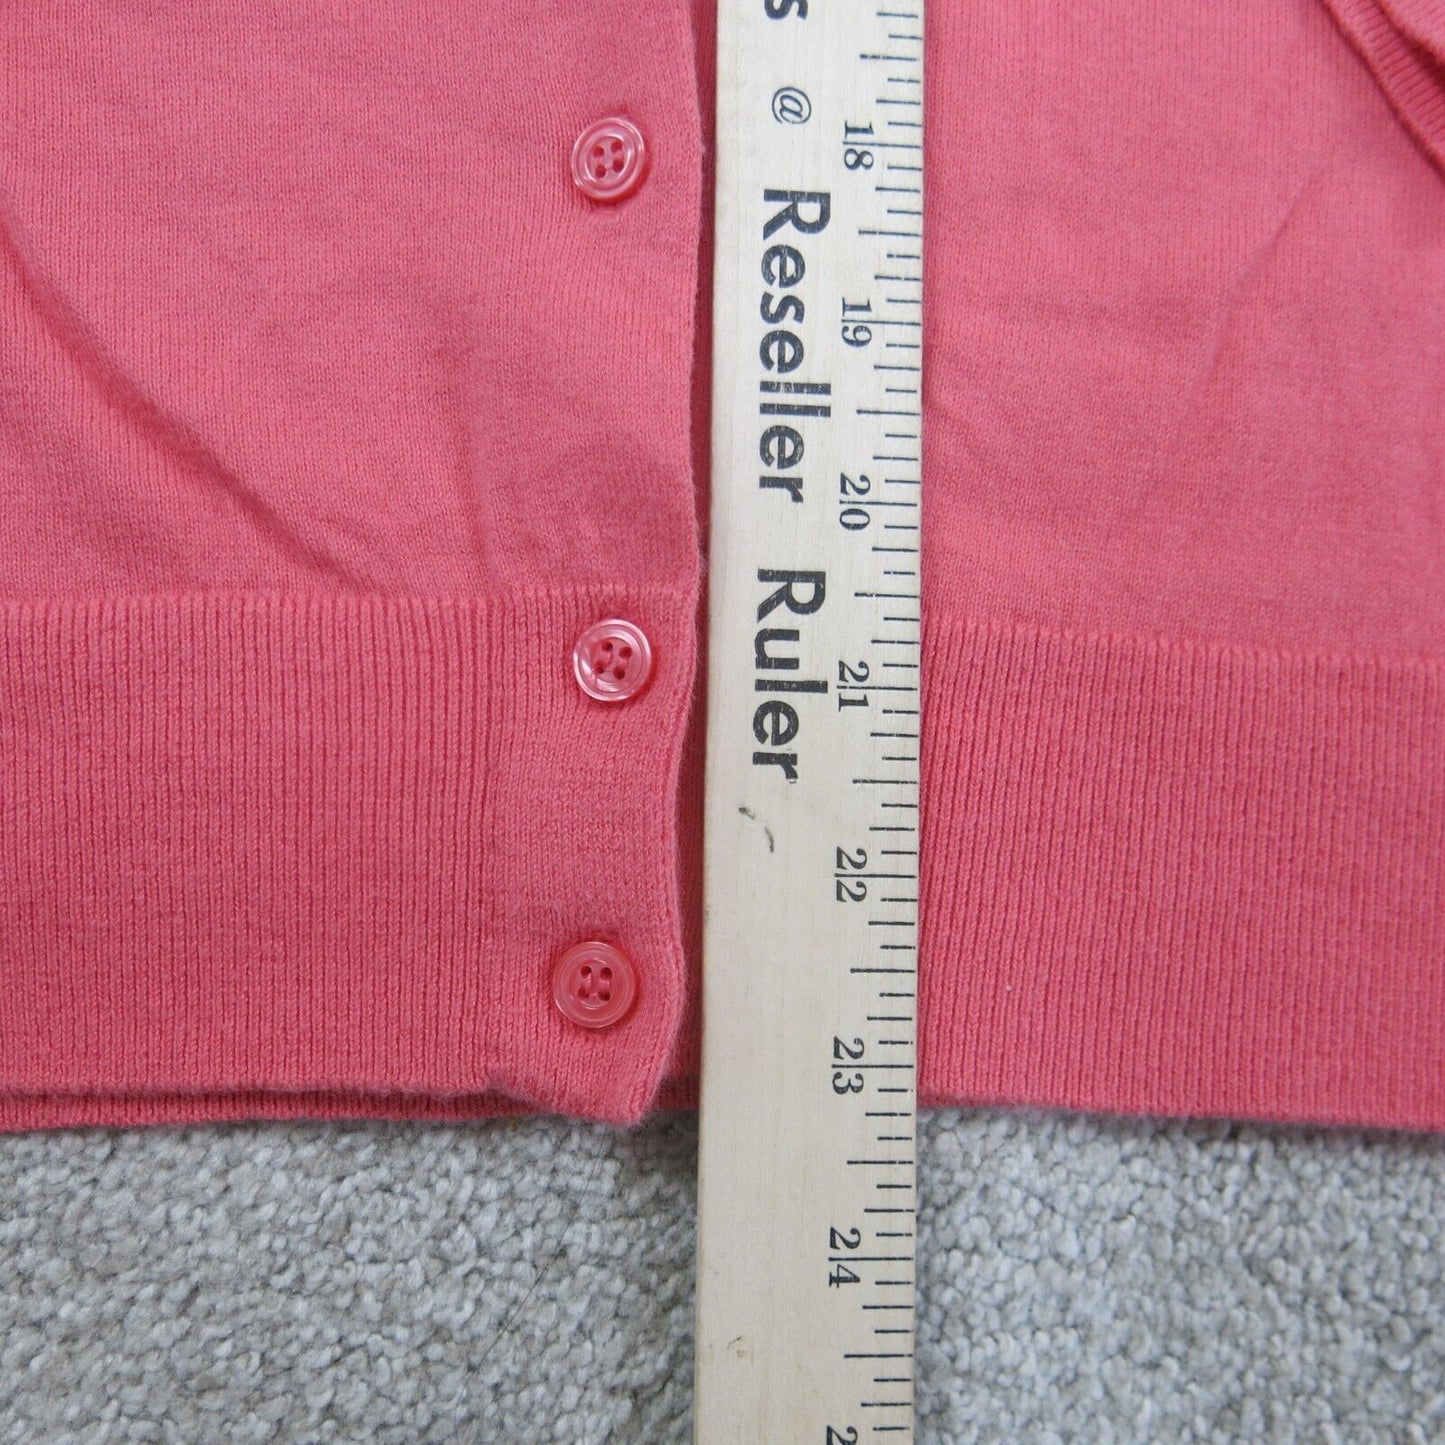 J Crew Cardigan Womens 2XL Pink Knitted Sweater Long Sleeve Crew Neck Casual